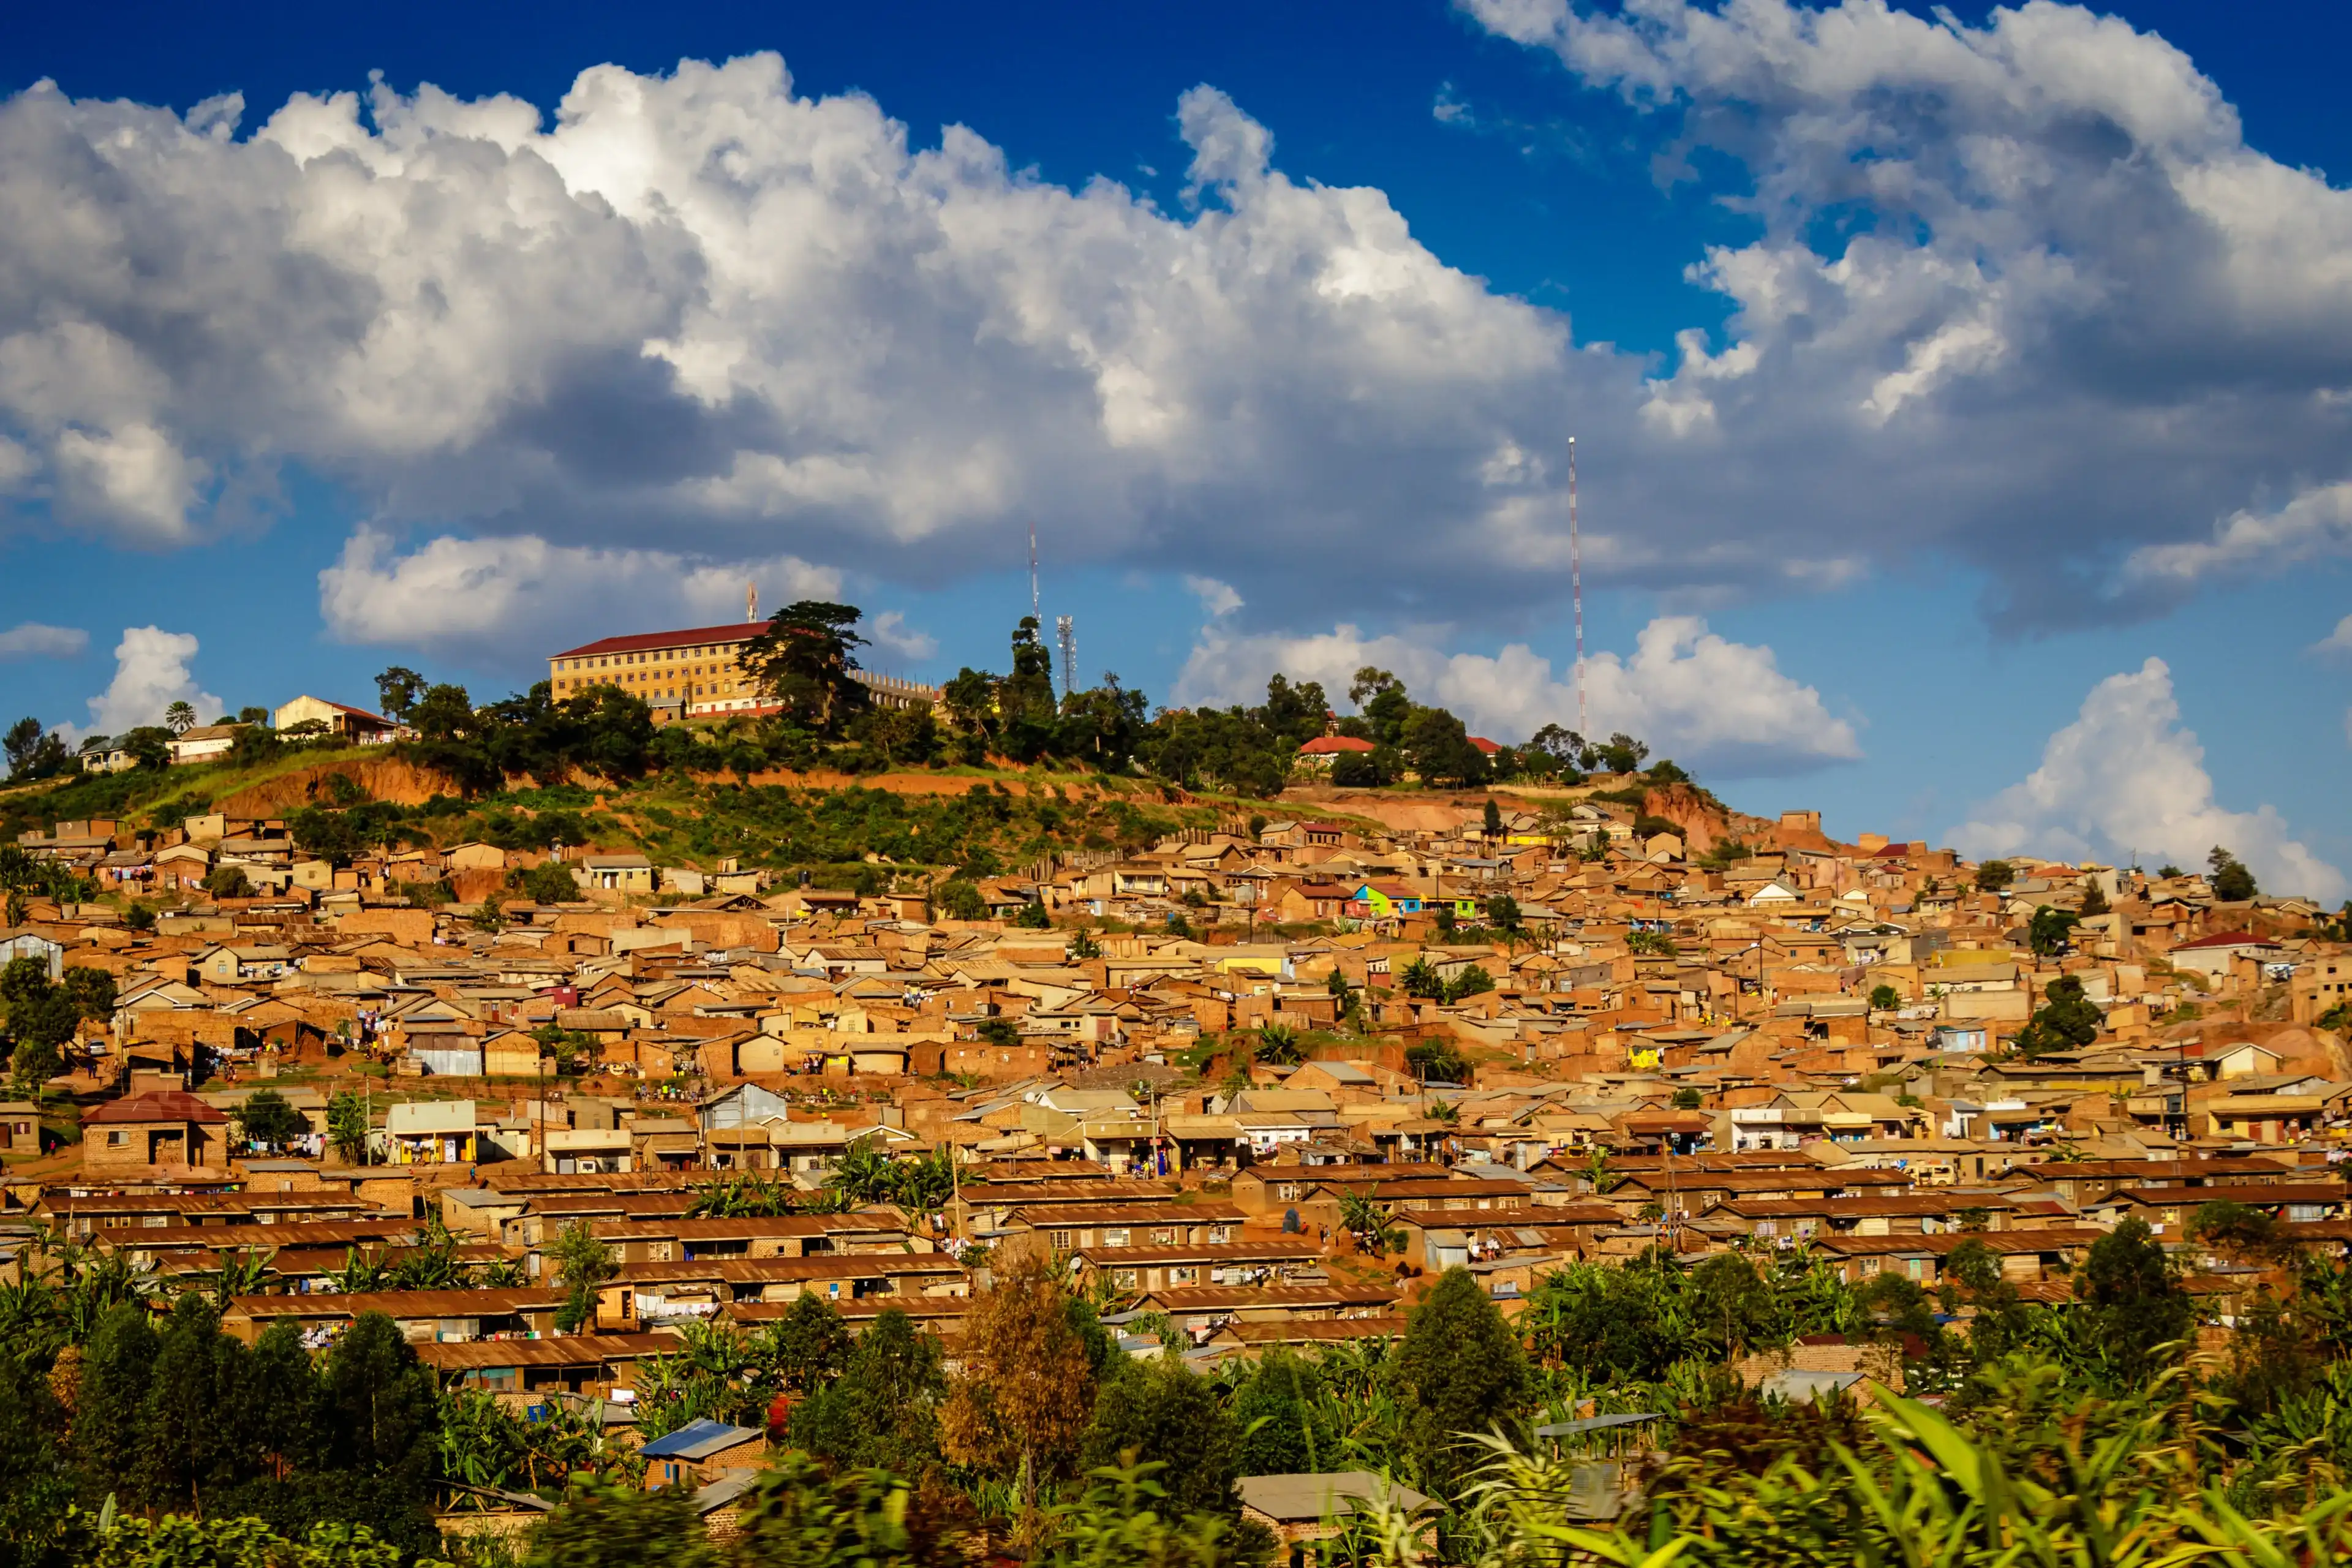 Outskirts of Kampala build on of the seven hills that are a symbol of the capital of Uganda